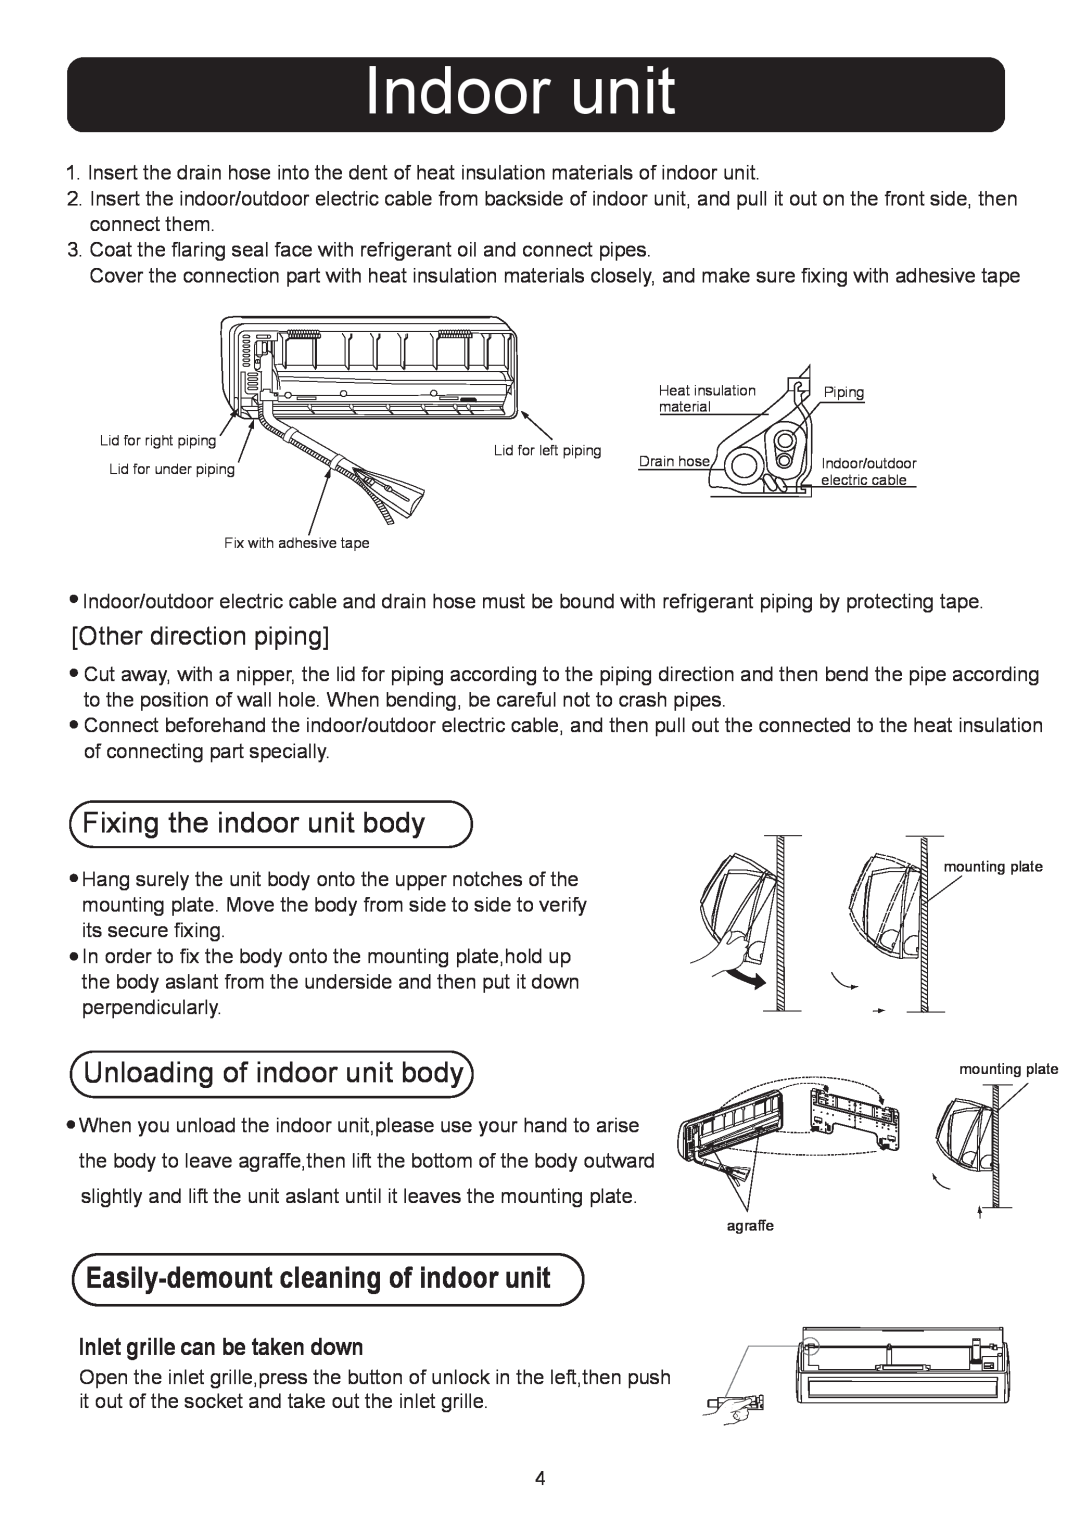 Haier HSU-18LEA13(T3) installation manual Indoor unit, Easily-demountcleaning of indoor unit, Other direction piping 